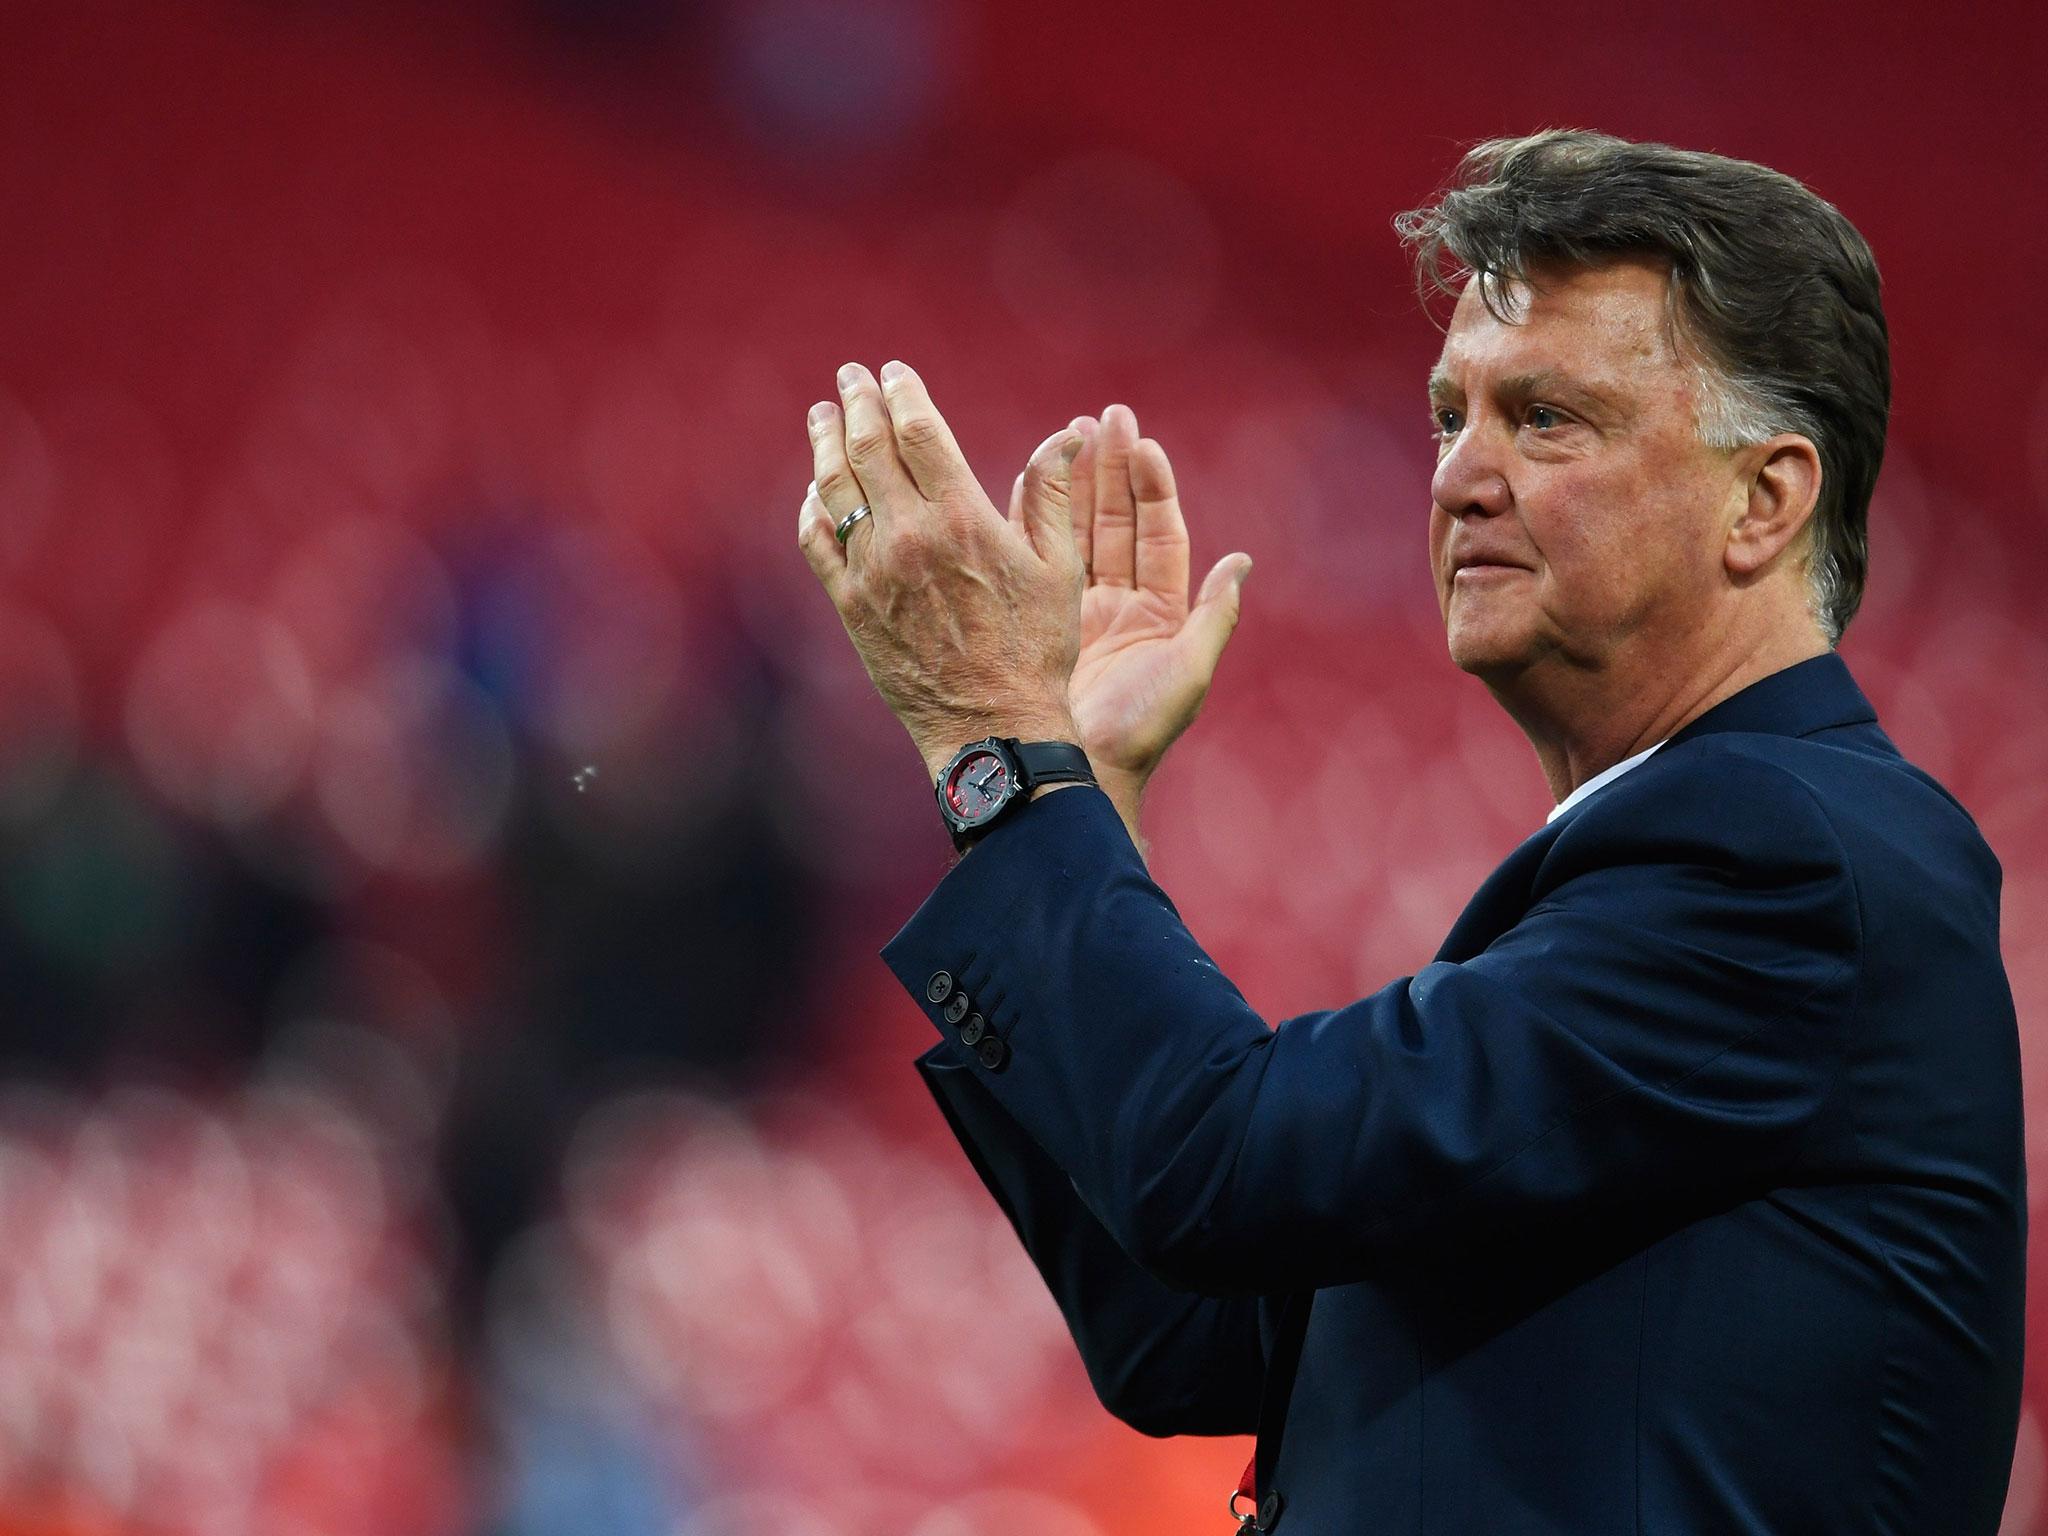 Louis van Gaal could return to football with the Netherlands